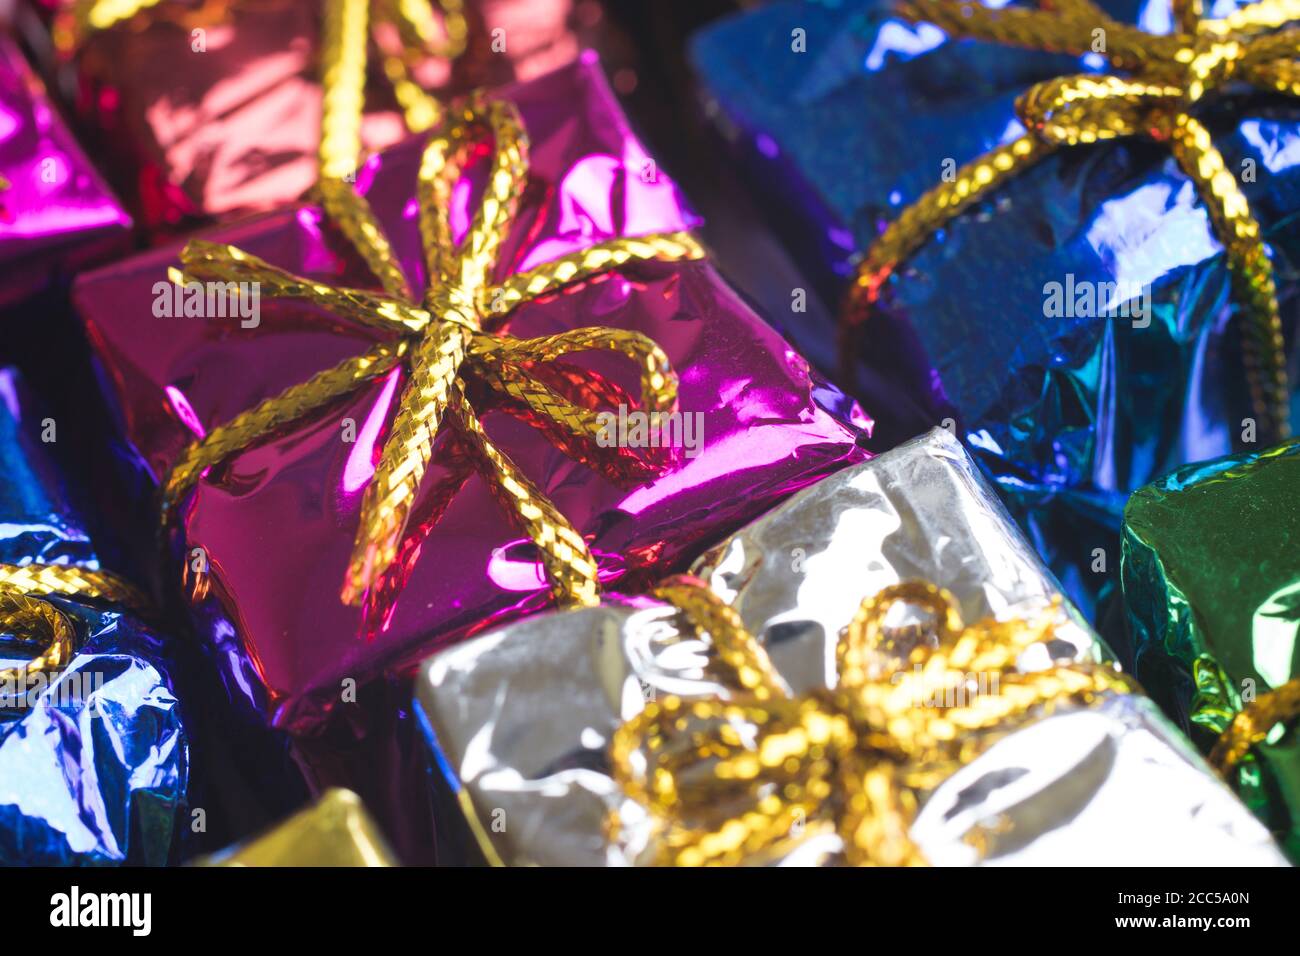 Close-up of present boxes with gifts. Celebration concept. Holidays background Stock Photo